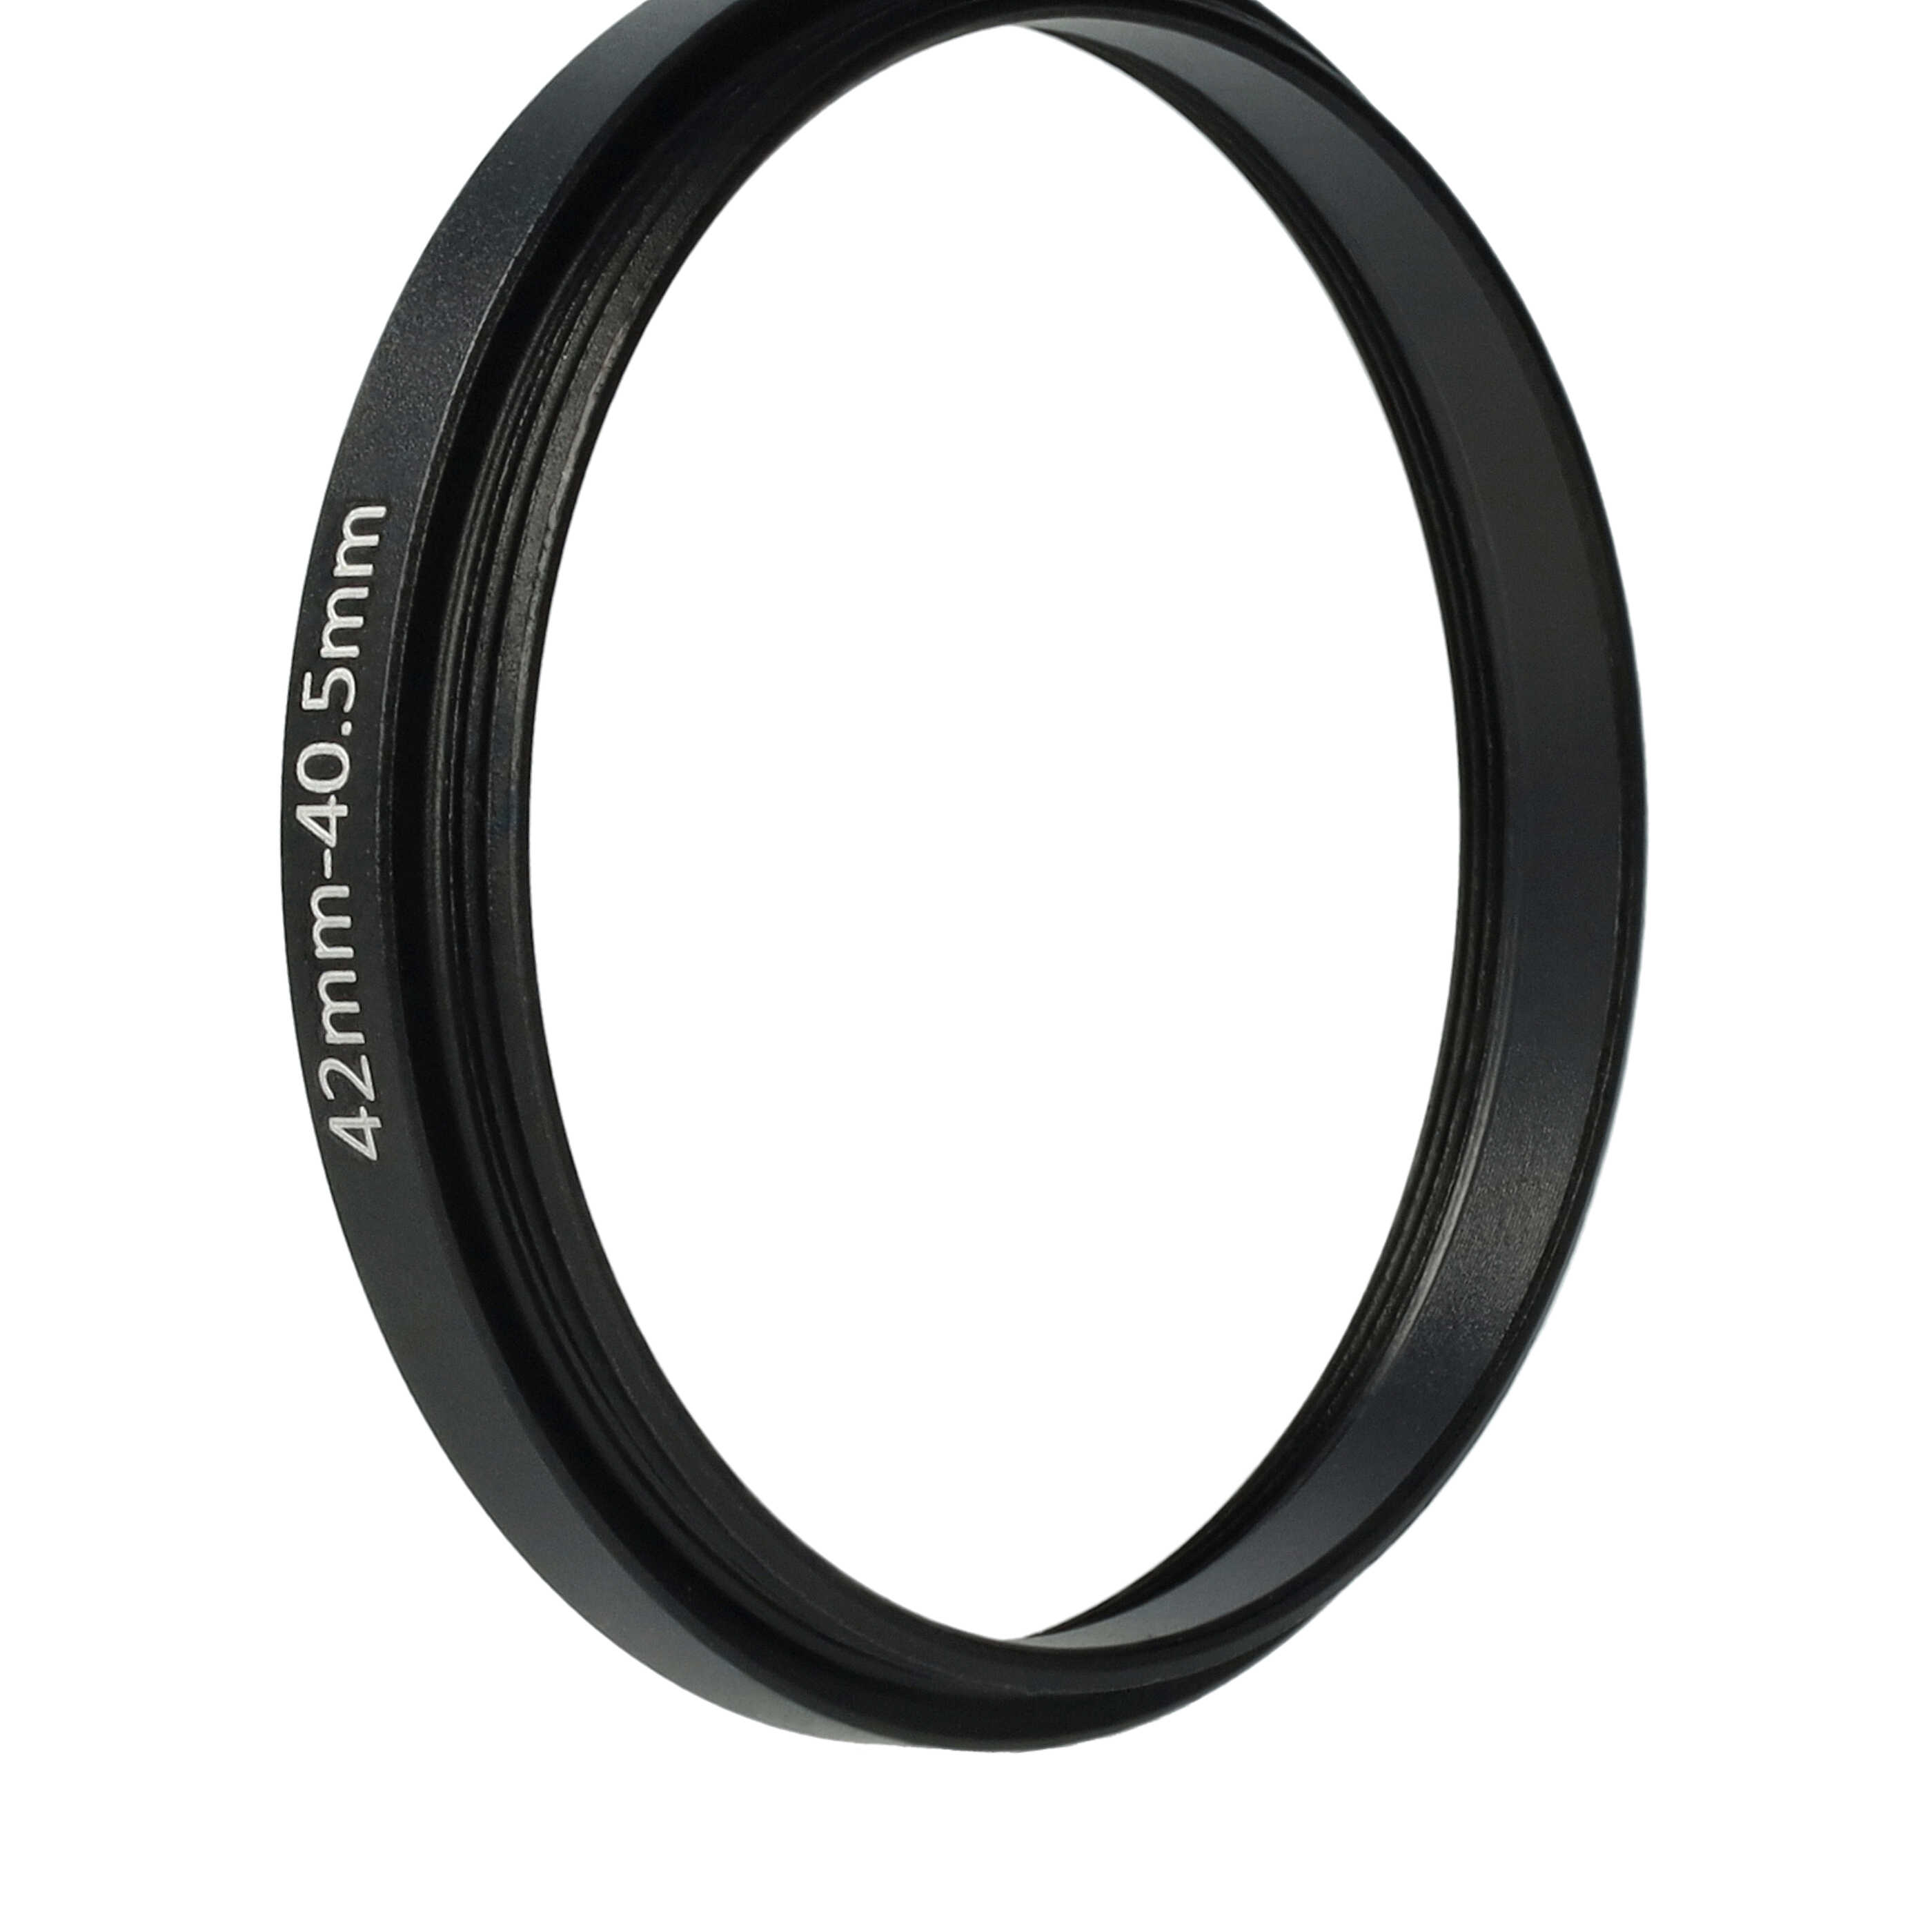 Step-Down Ring Adapter from 42 mm to 40.5 mm suitable for Camera Lens - Filter Adapter, metal